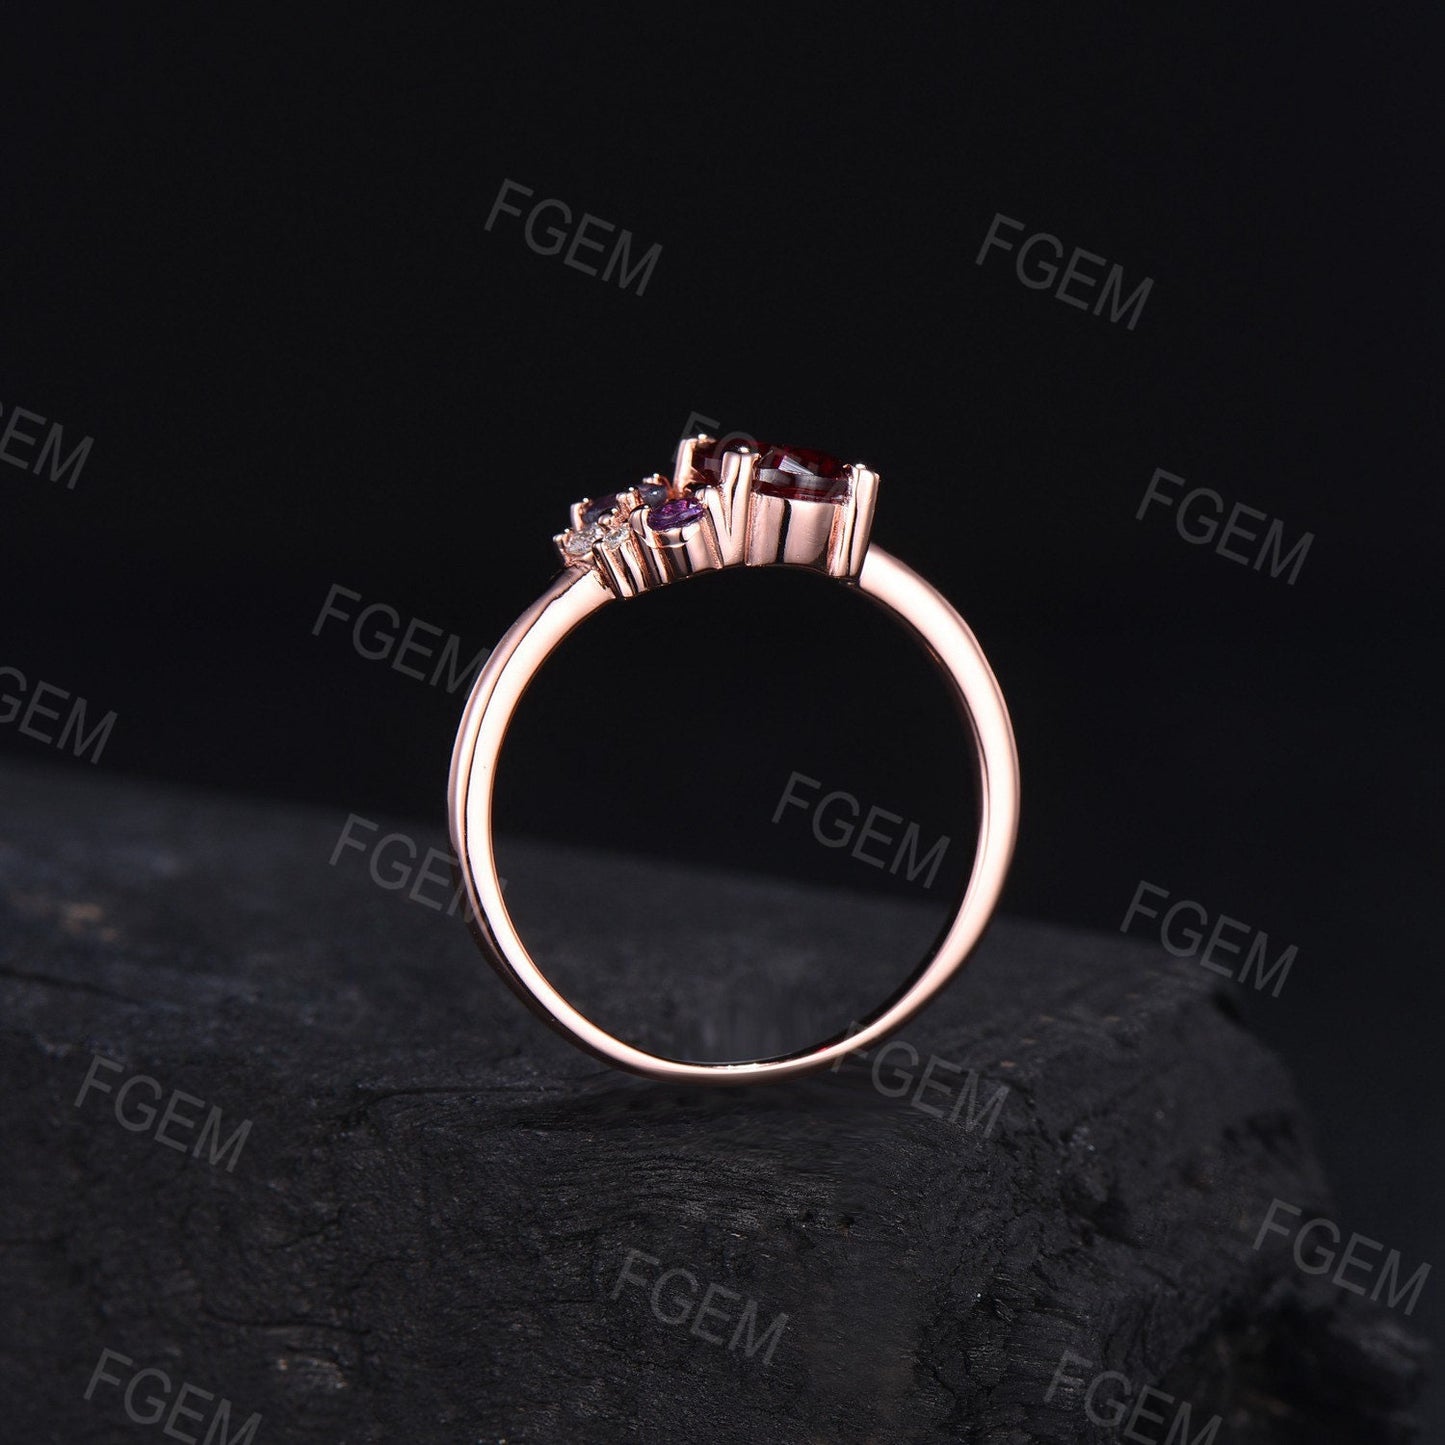 1.5ct Oval Cut Ruby Gemstone Jewelry 14K Rose Gold Ruby Alexandrite Amethyst Cluster Engagement Ring Multi Birthstone Ring Personalized Gift